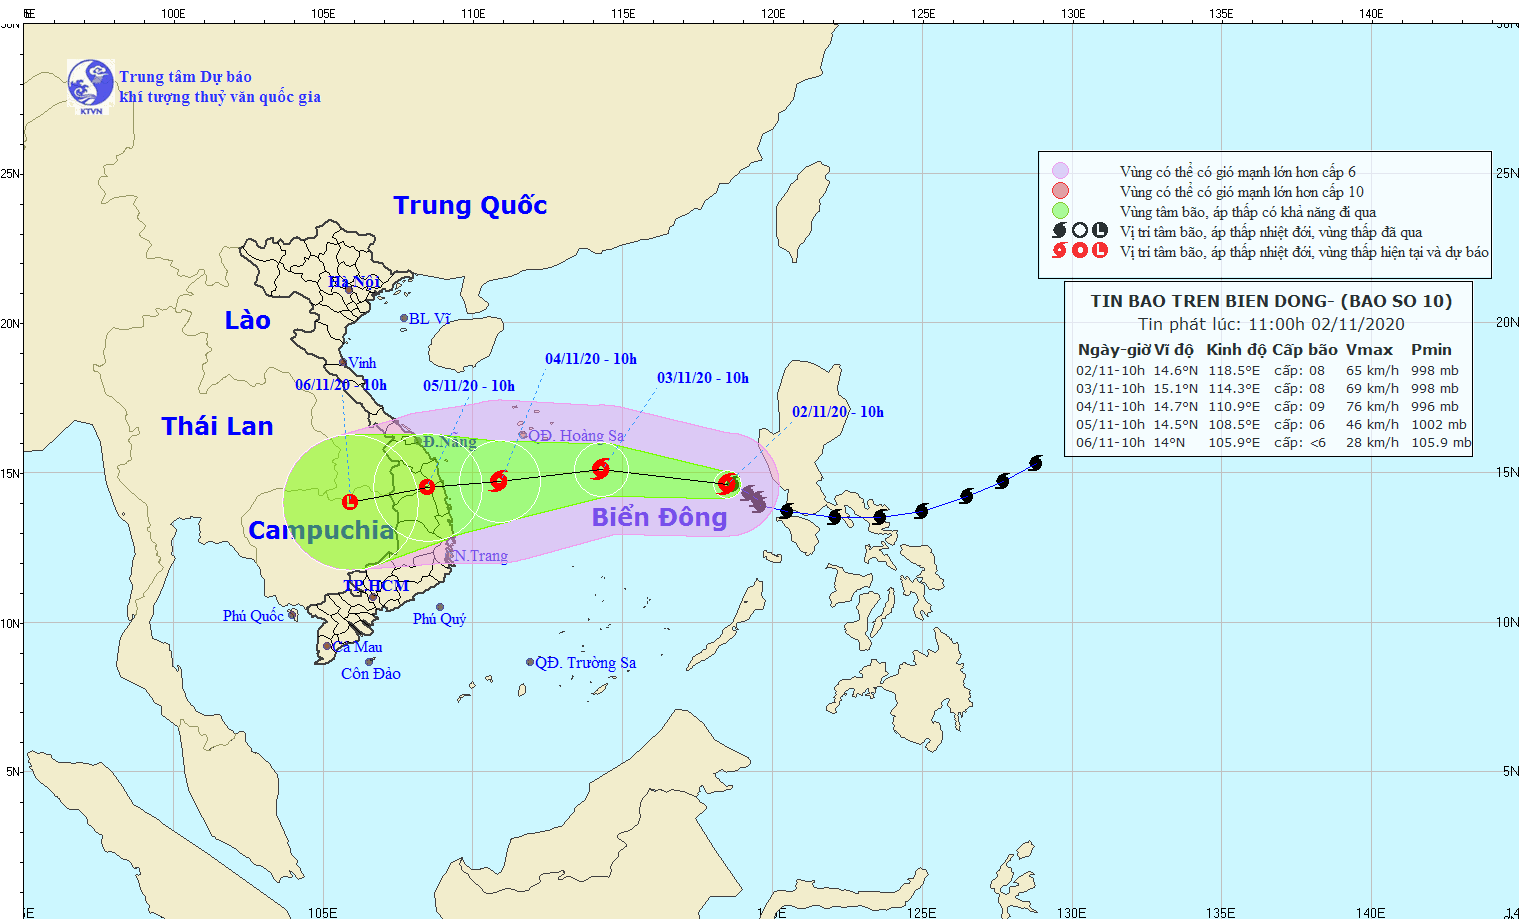 A path map of typhoon Goni 